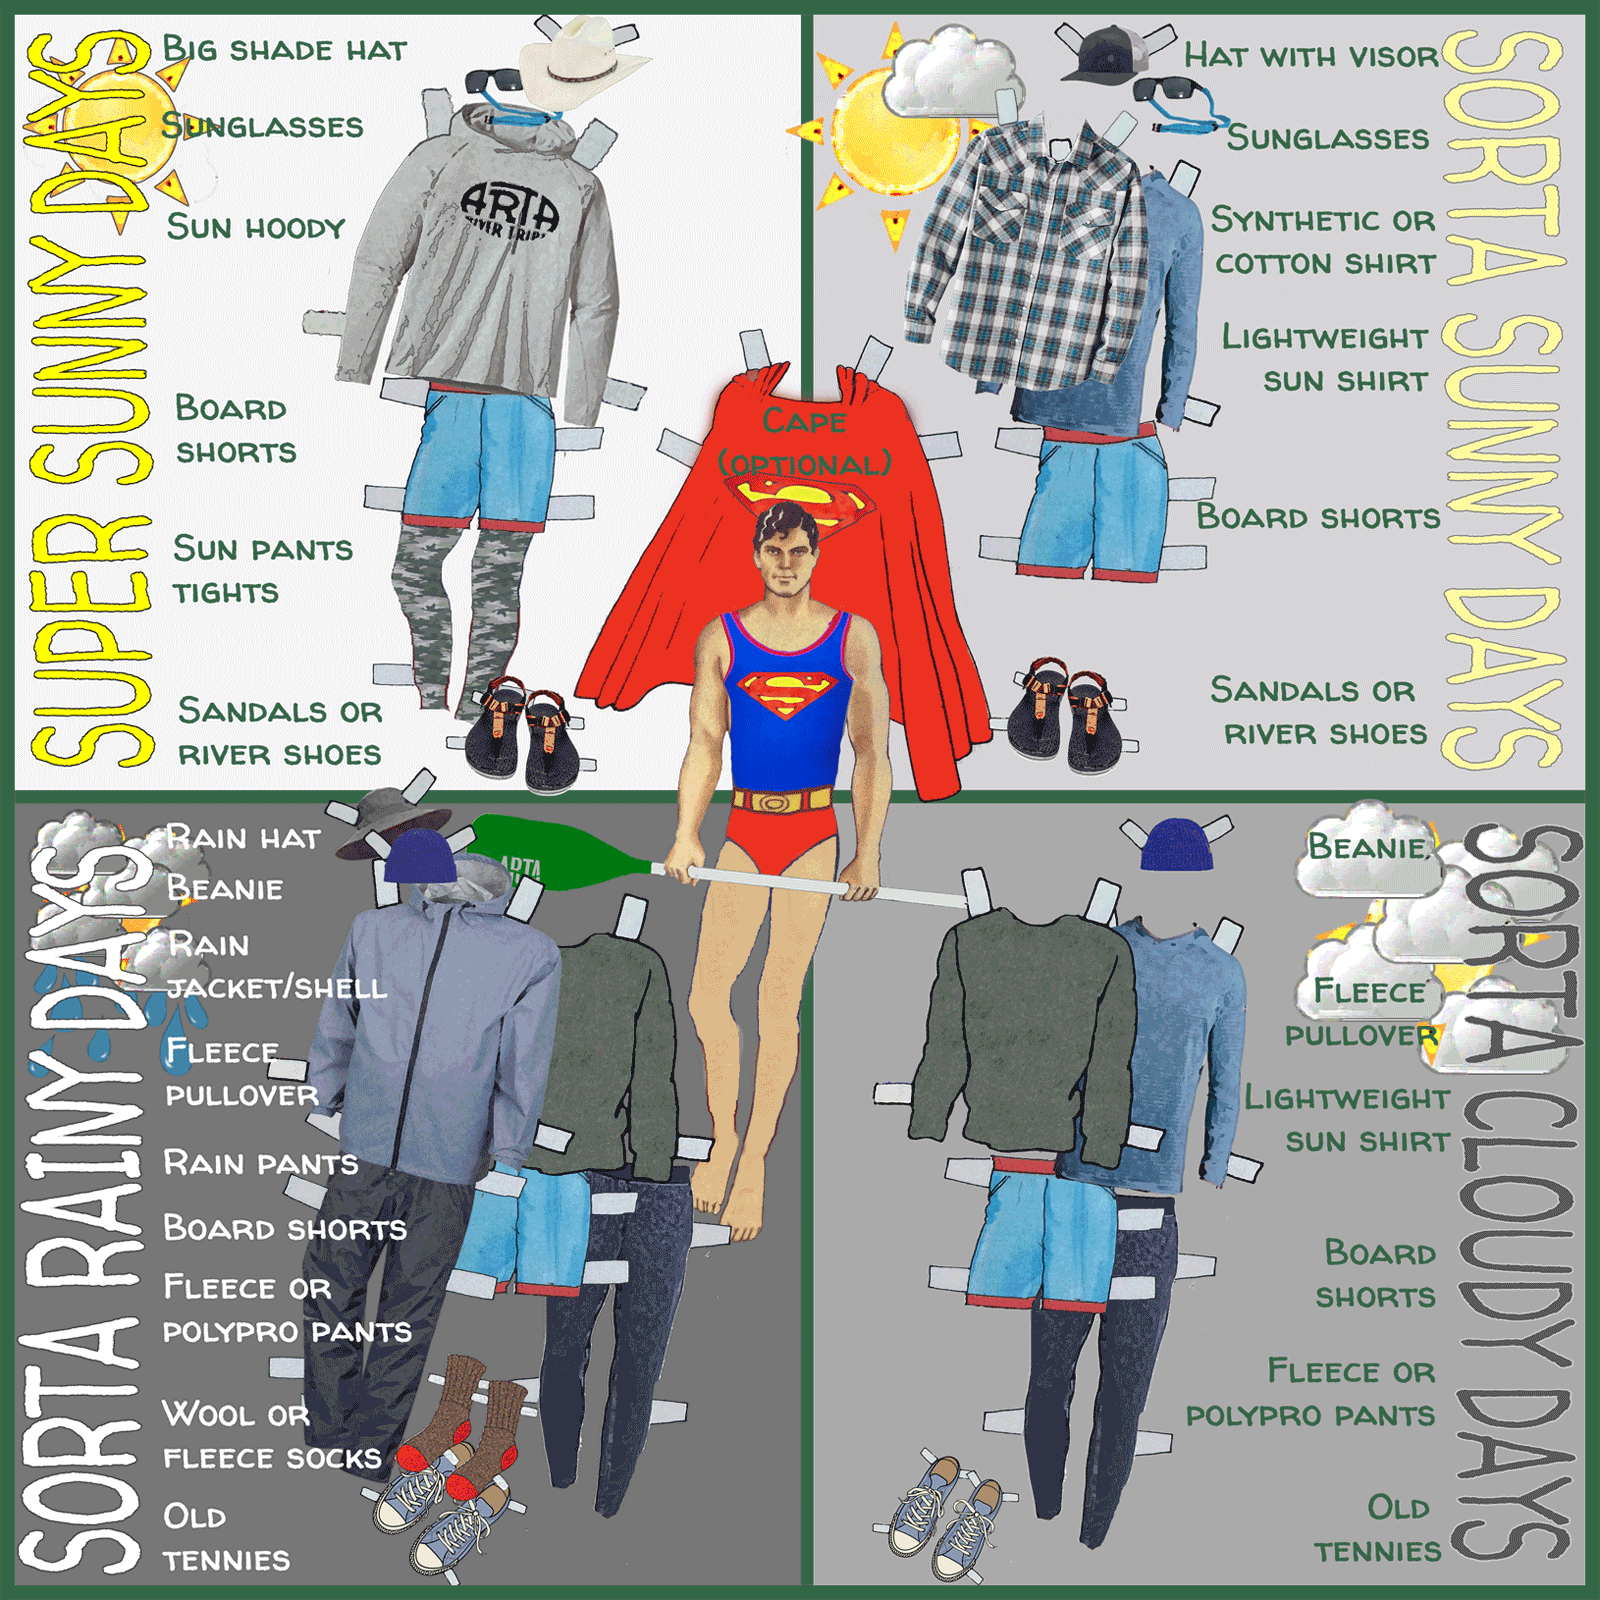 What to wear on the river if you are a superman